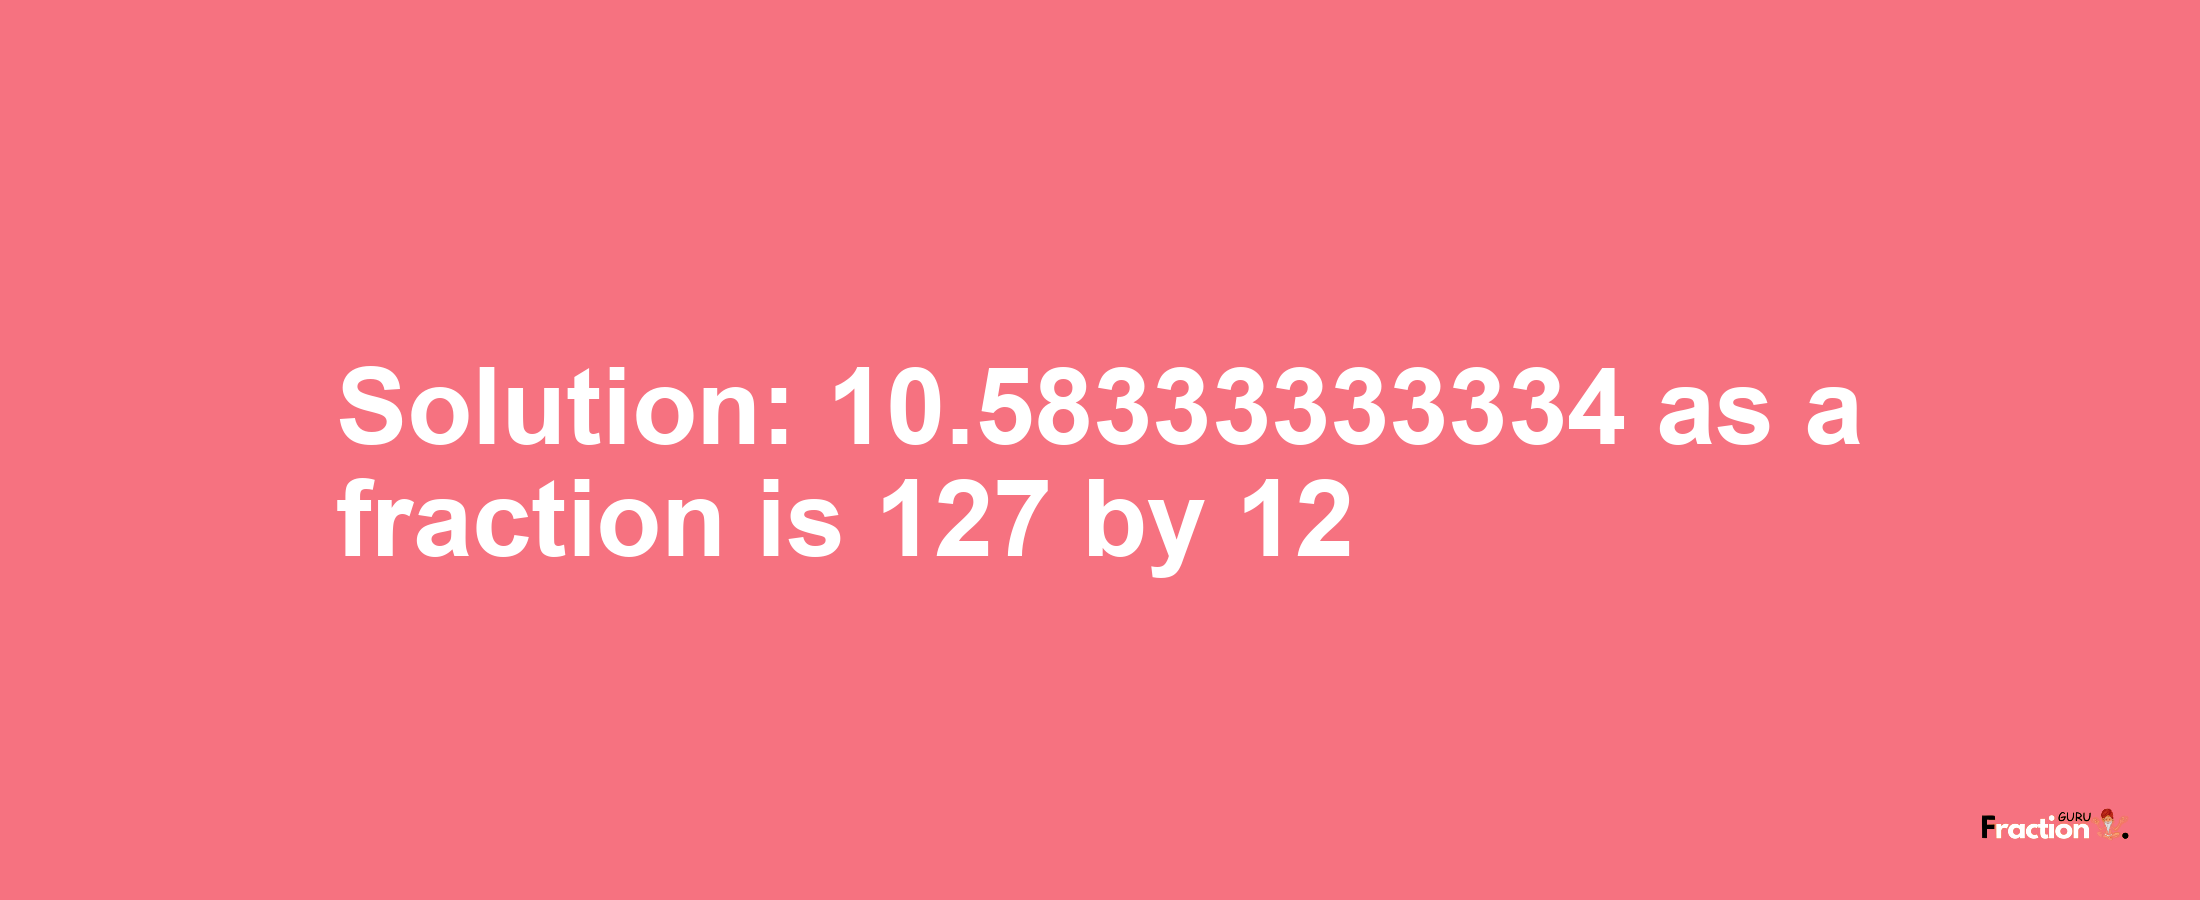 Solution:10.58333333334 as a fraction is 127/12